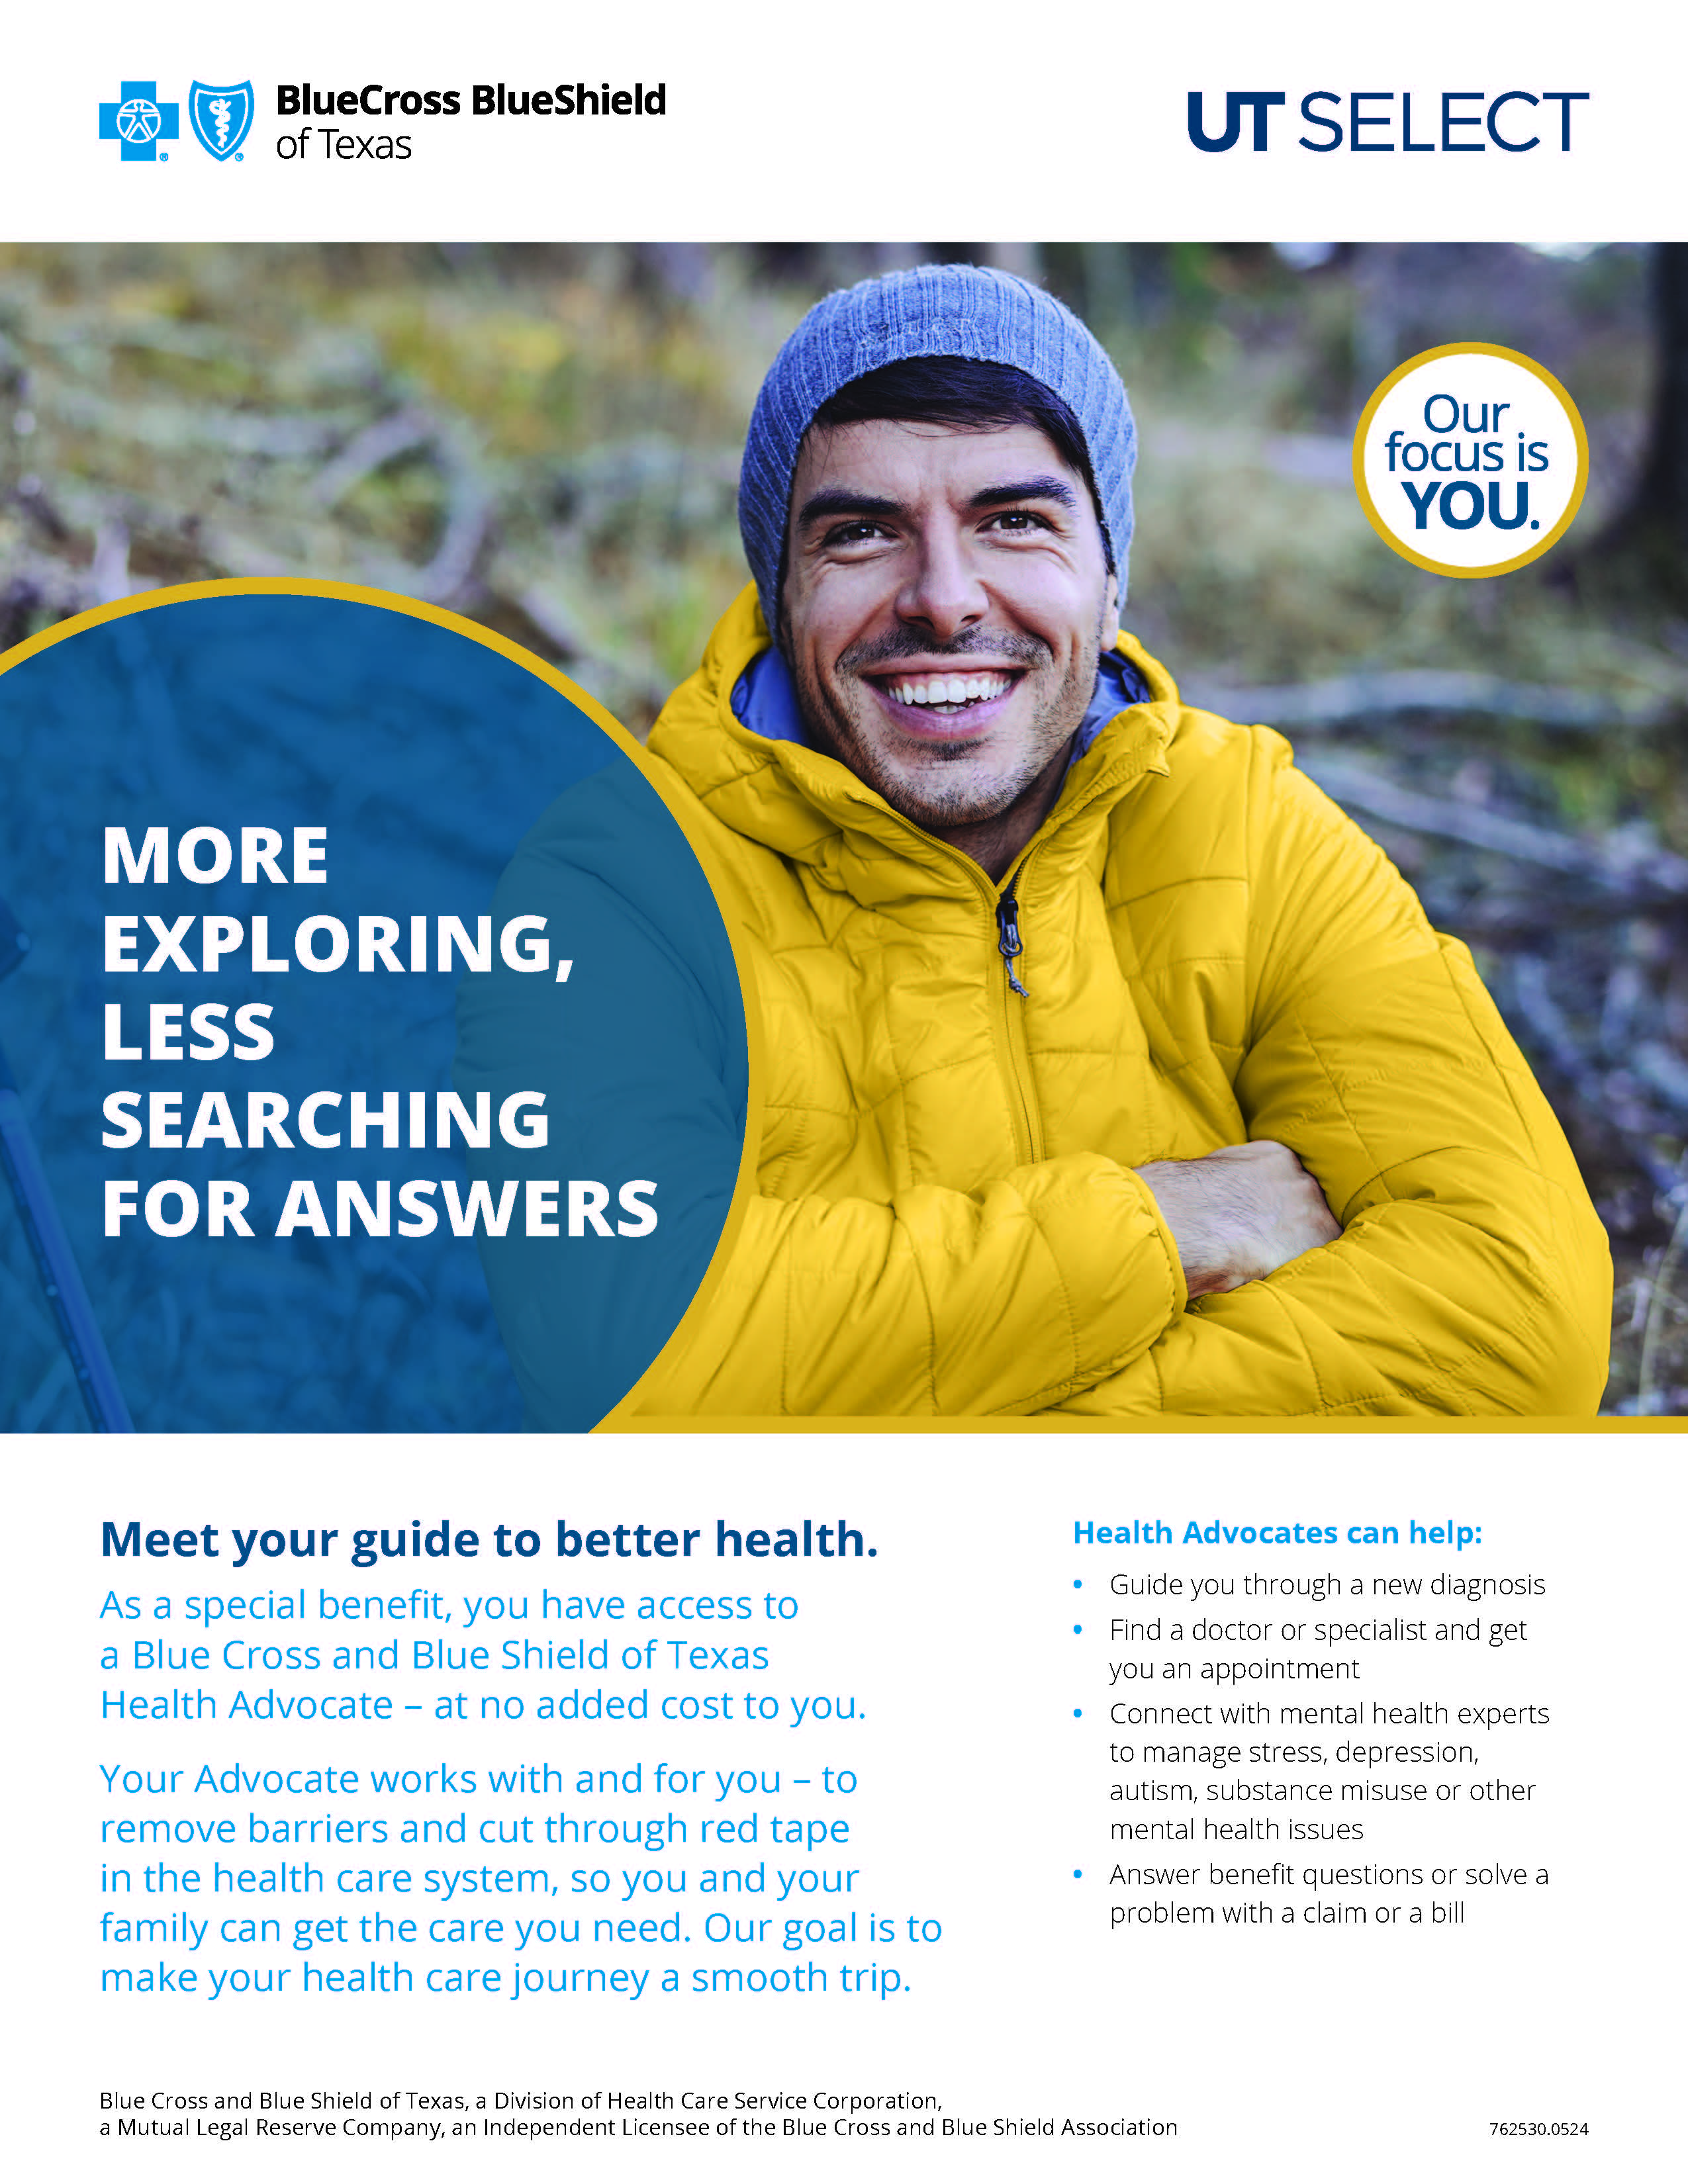 UT SELECT Health Advocate Solutions flyer